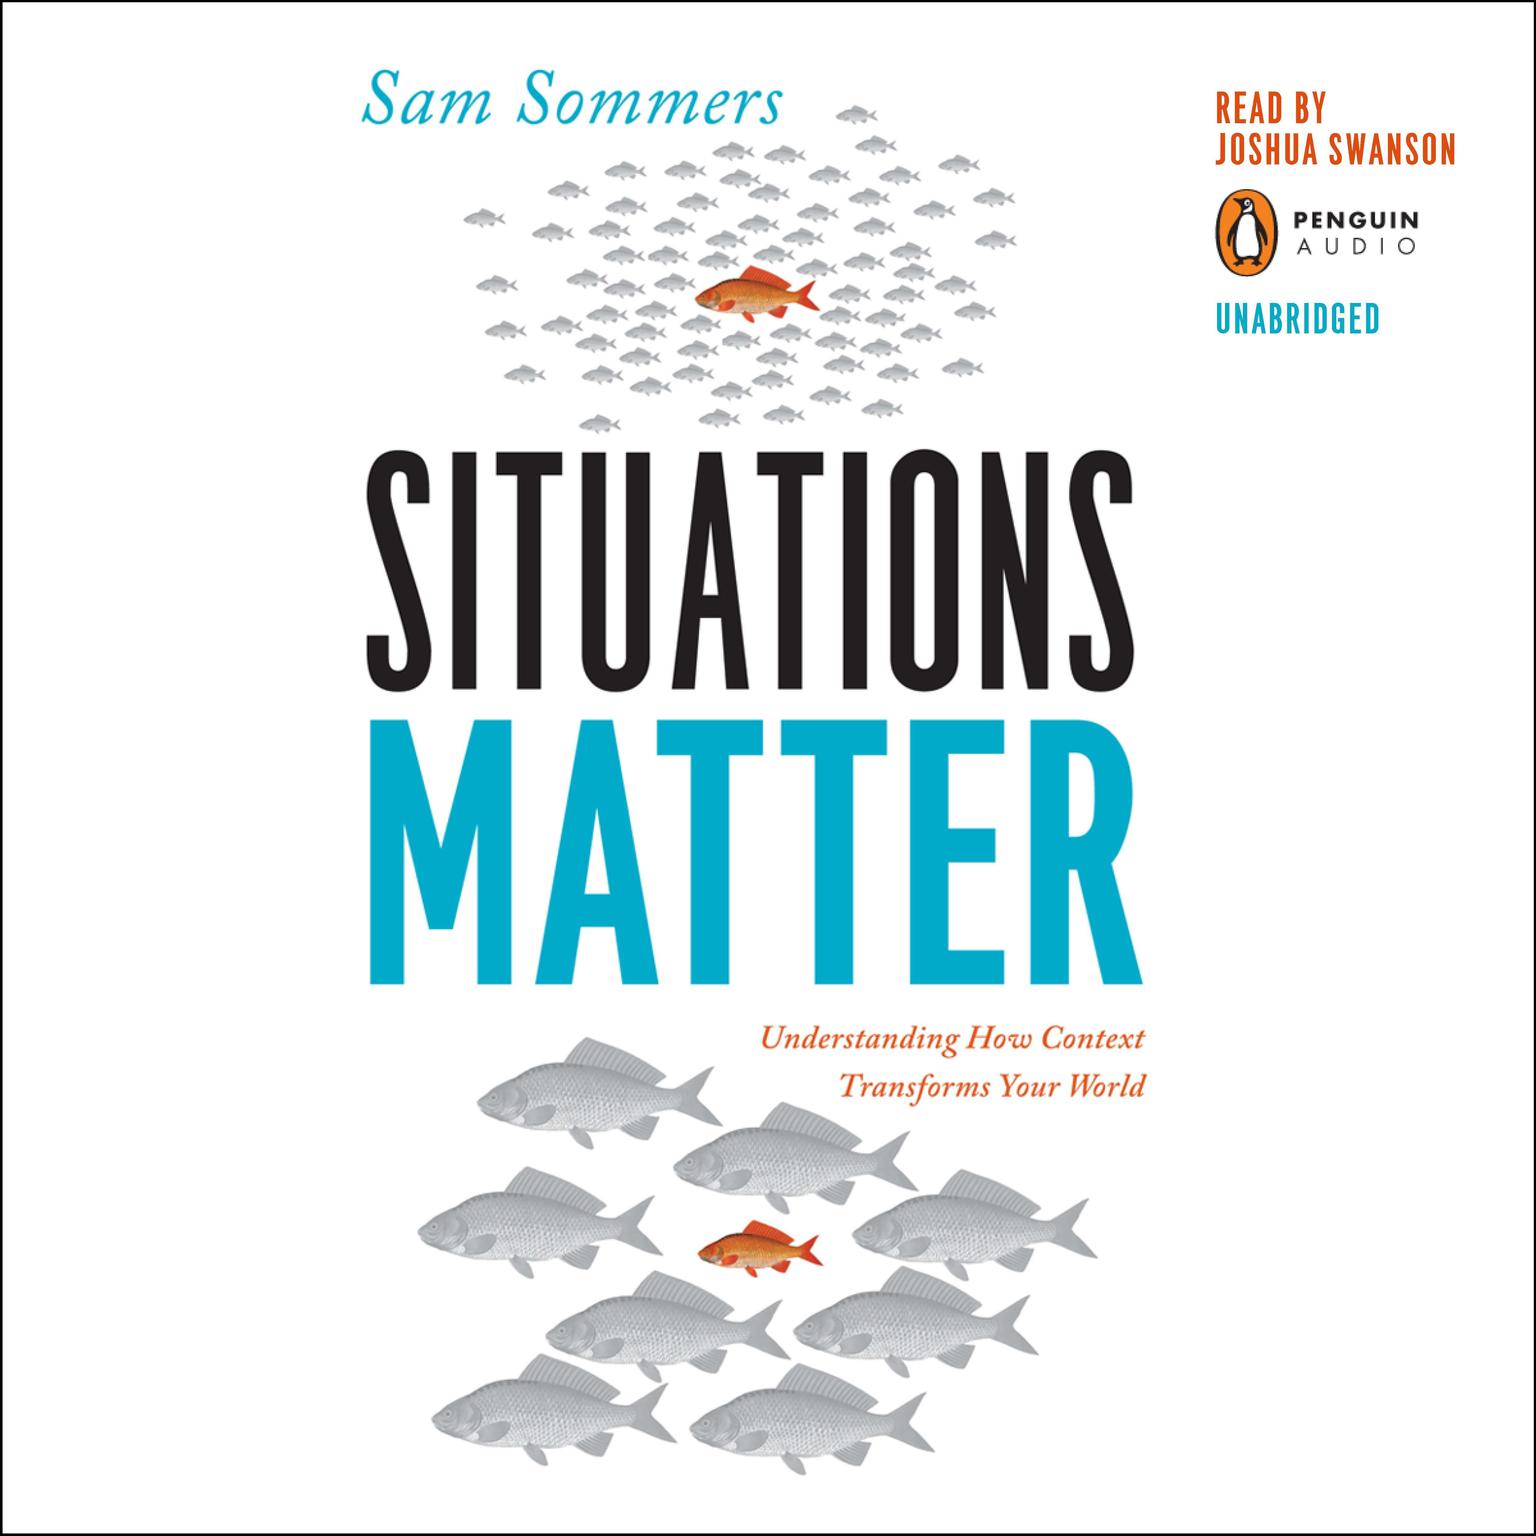 Situations Matter: Understanding How Context Transforms Your World Audiobook, by Sam Sommers